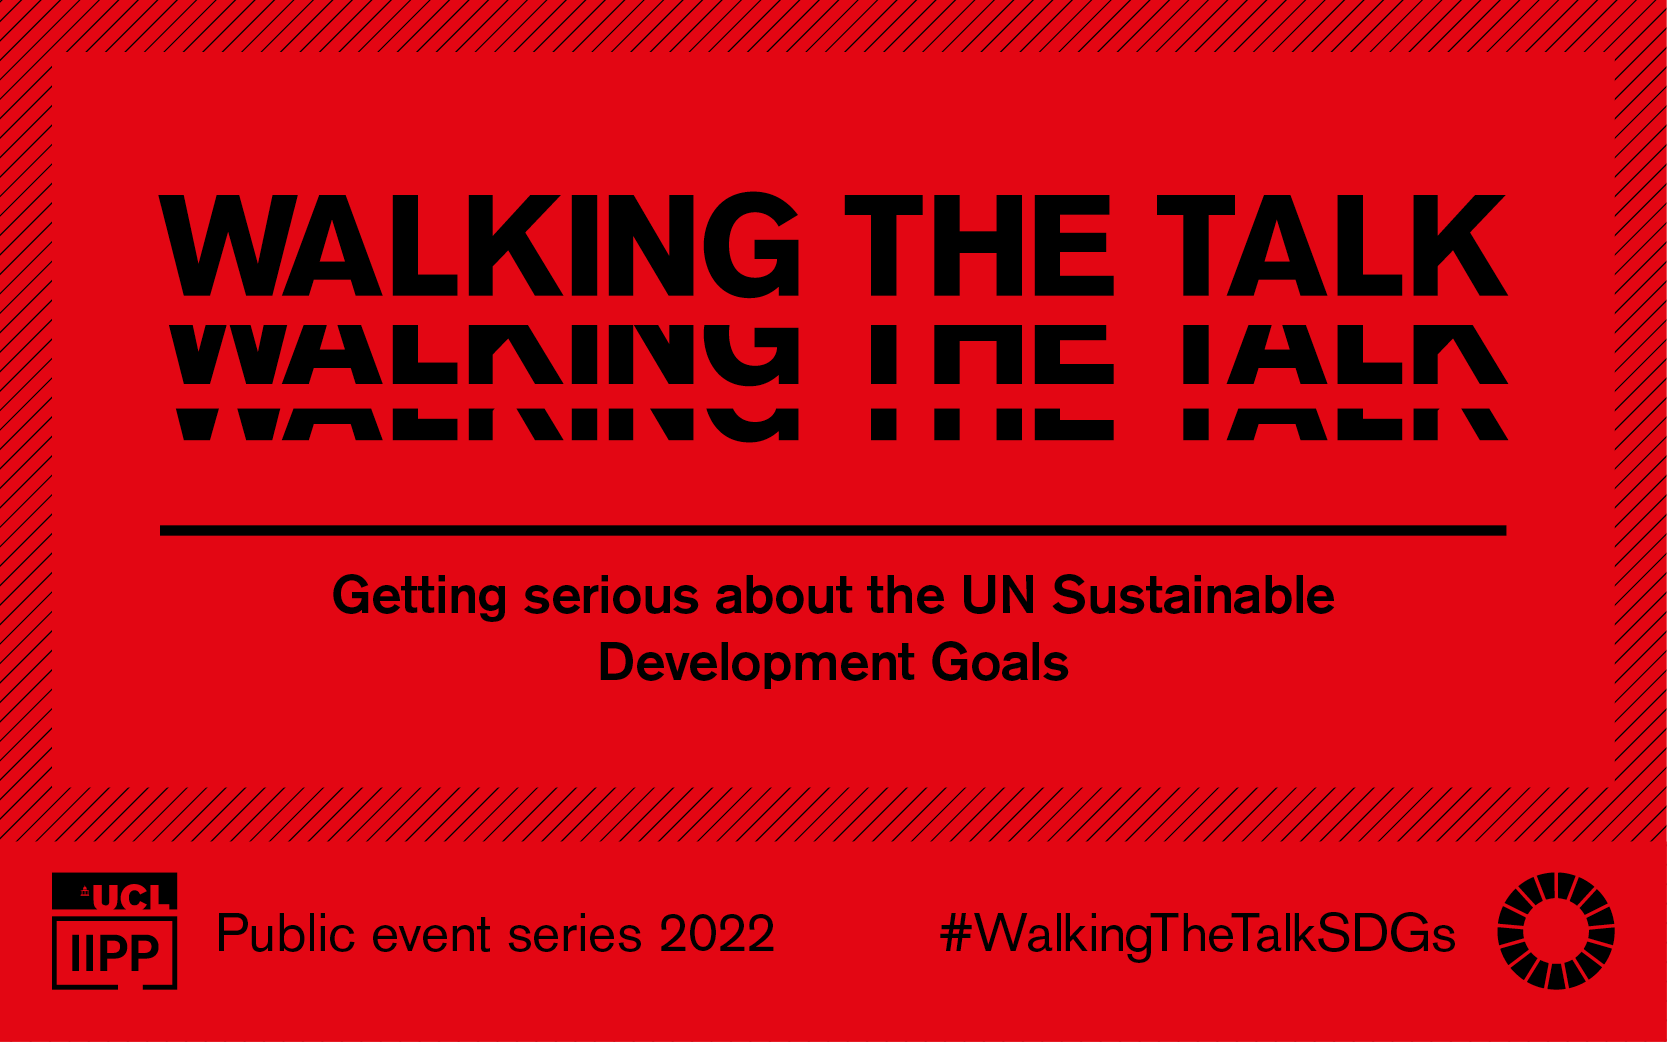 Walking the talk: Getting serious about the UN Sustainable Development Goals